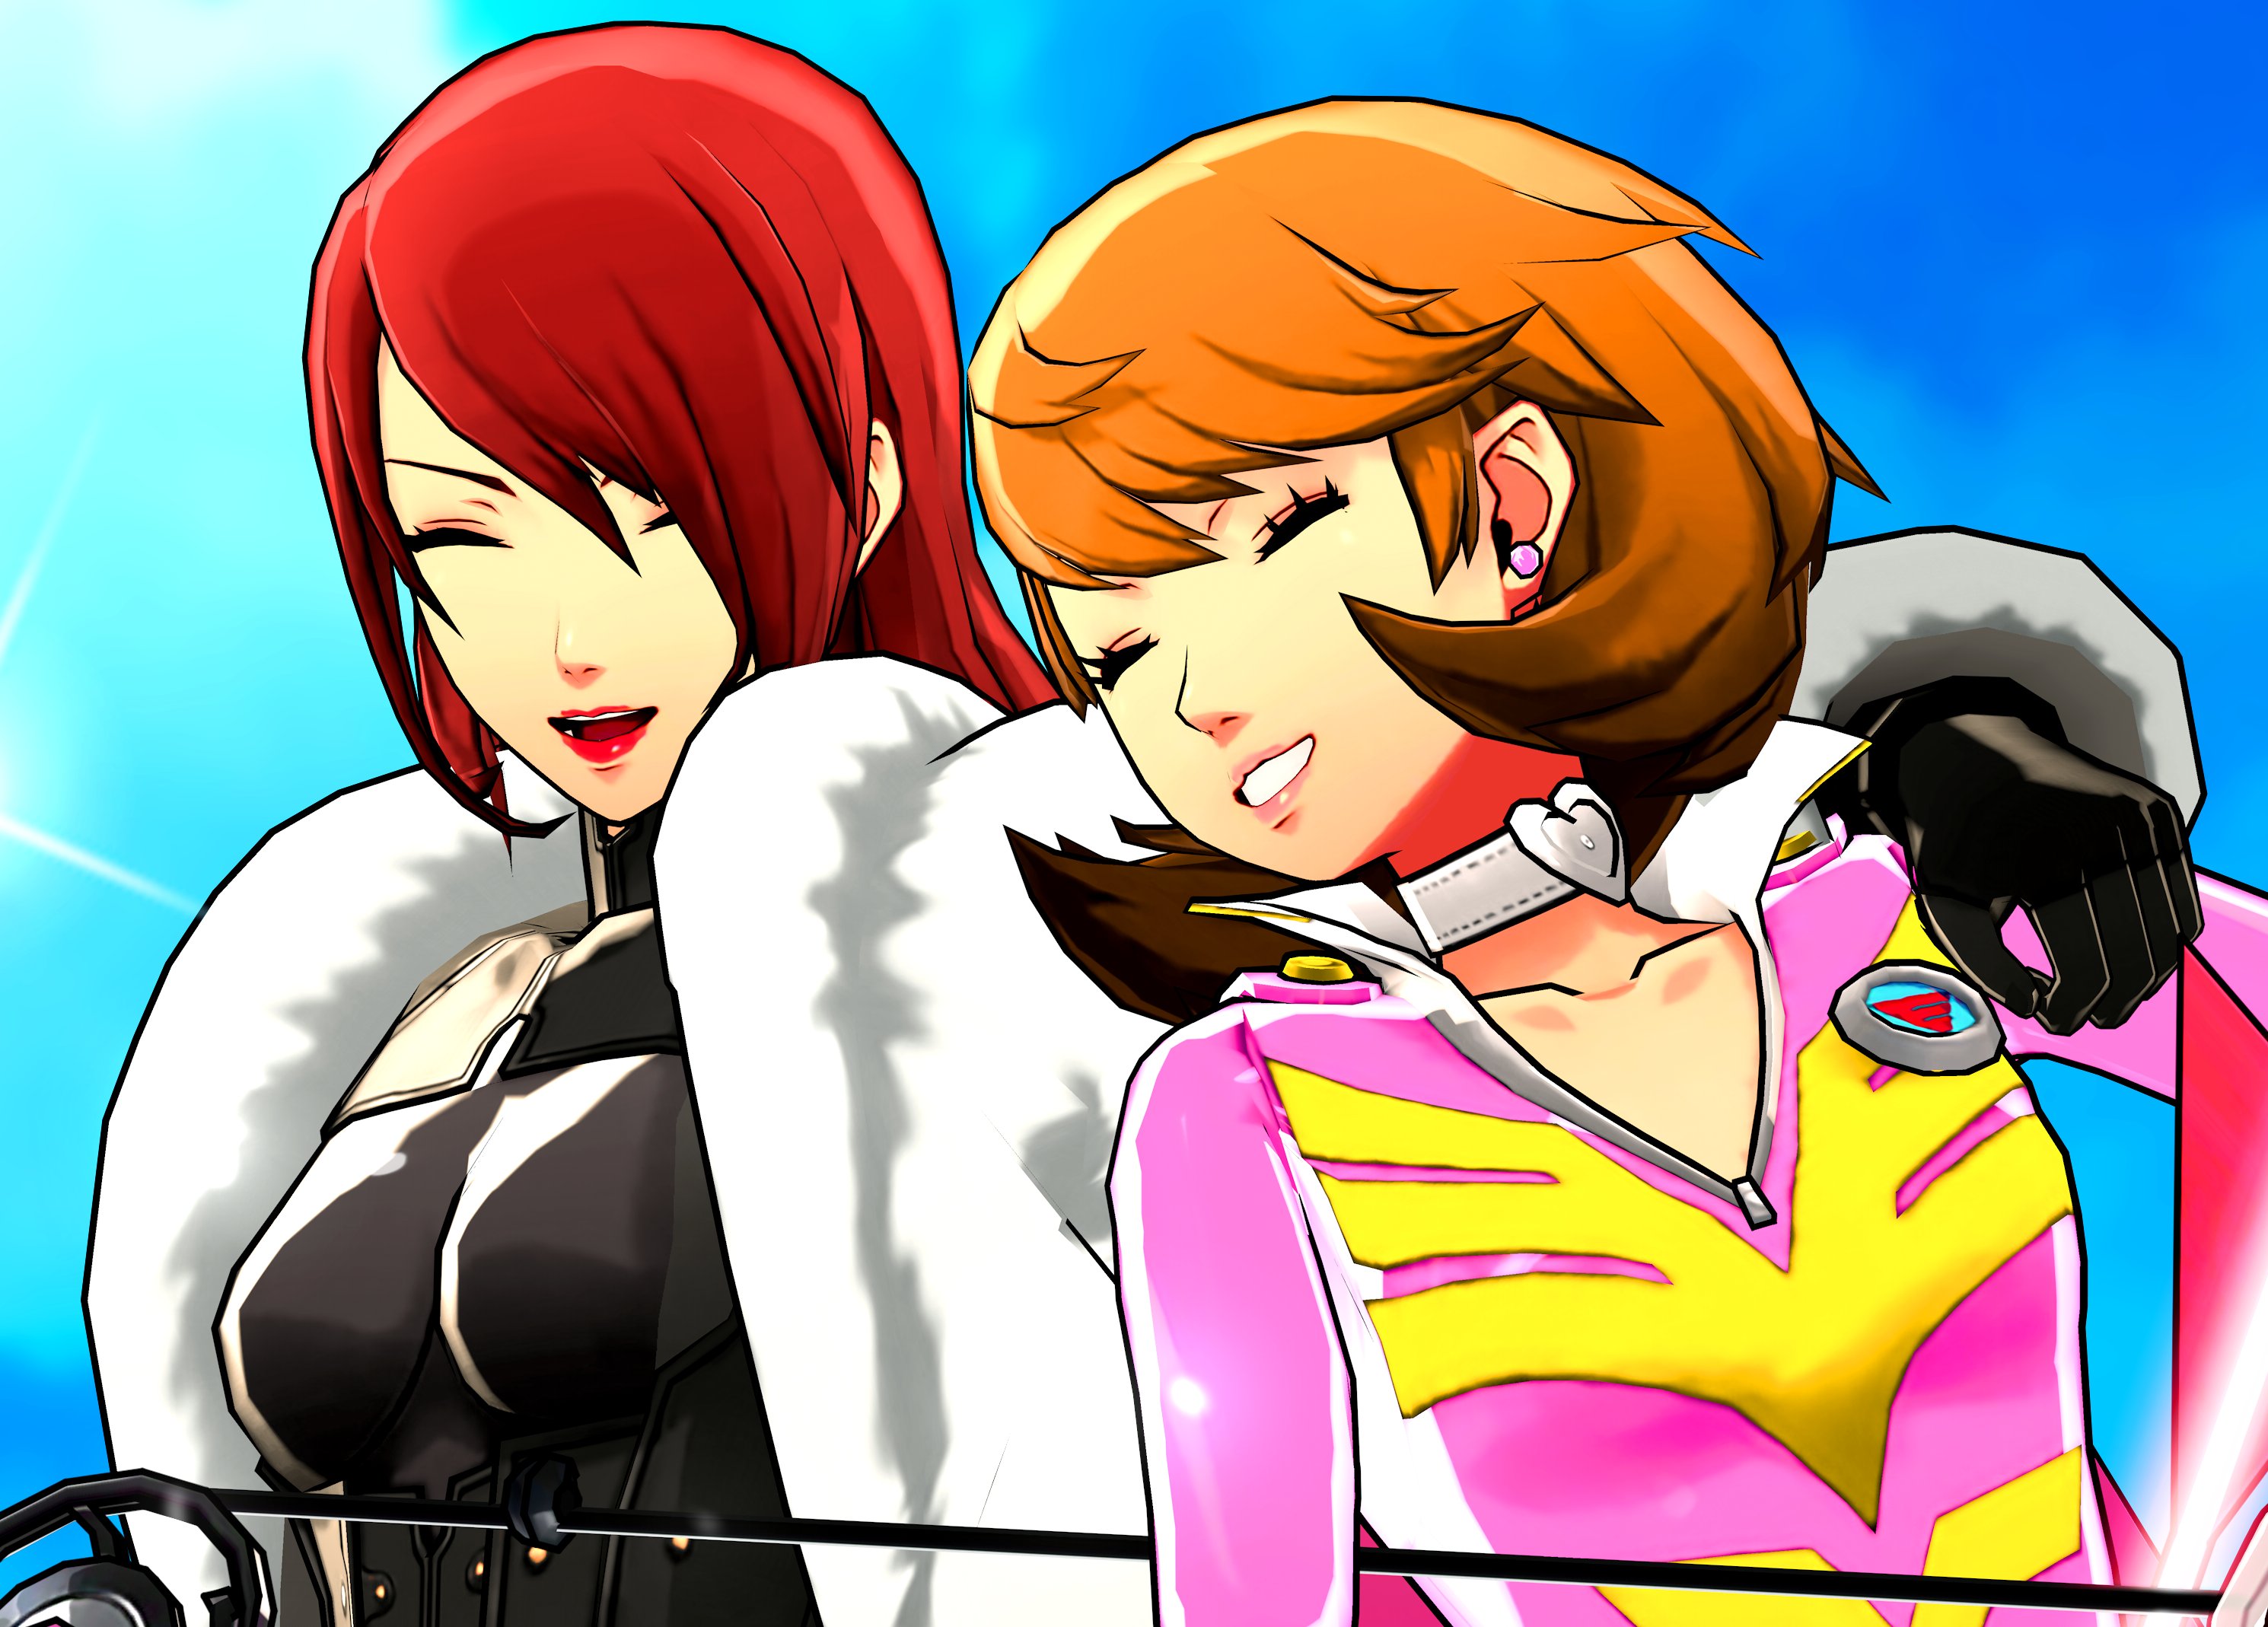 John Rizzo on X: Mitsuru Kirijo & Artemisia [Persona 4 Arena] Couldn't  think of a unique background for this one, so I just went with the  tried-and-true Velvet Arena.  / X